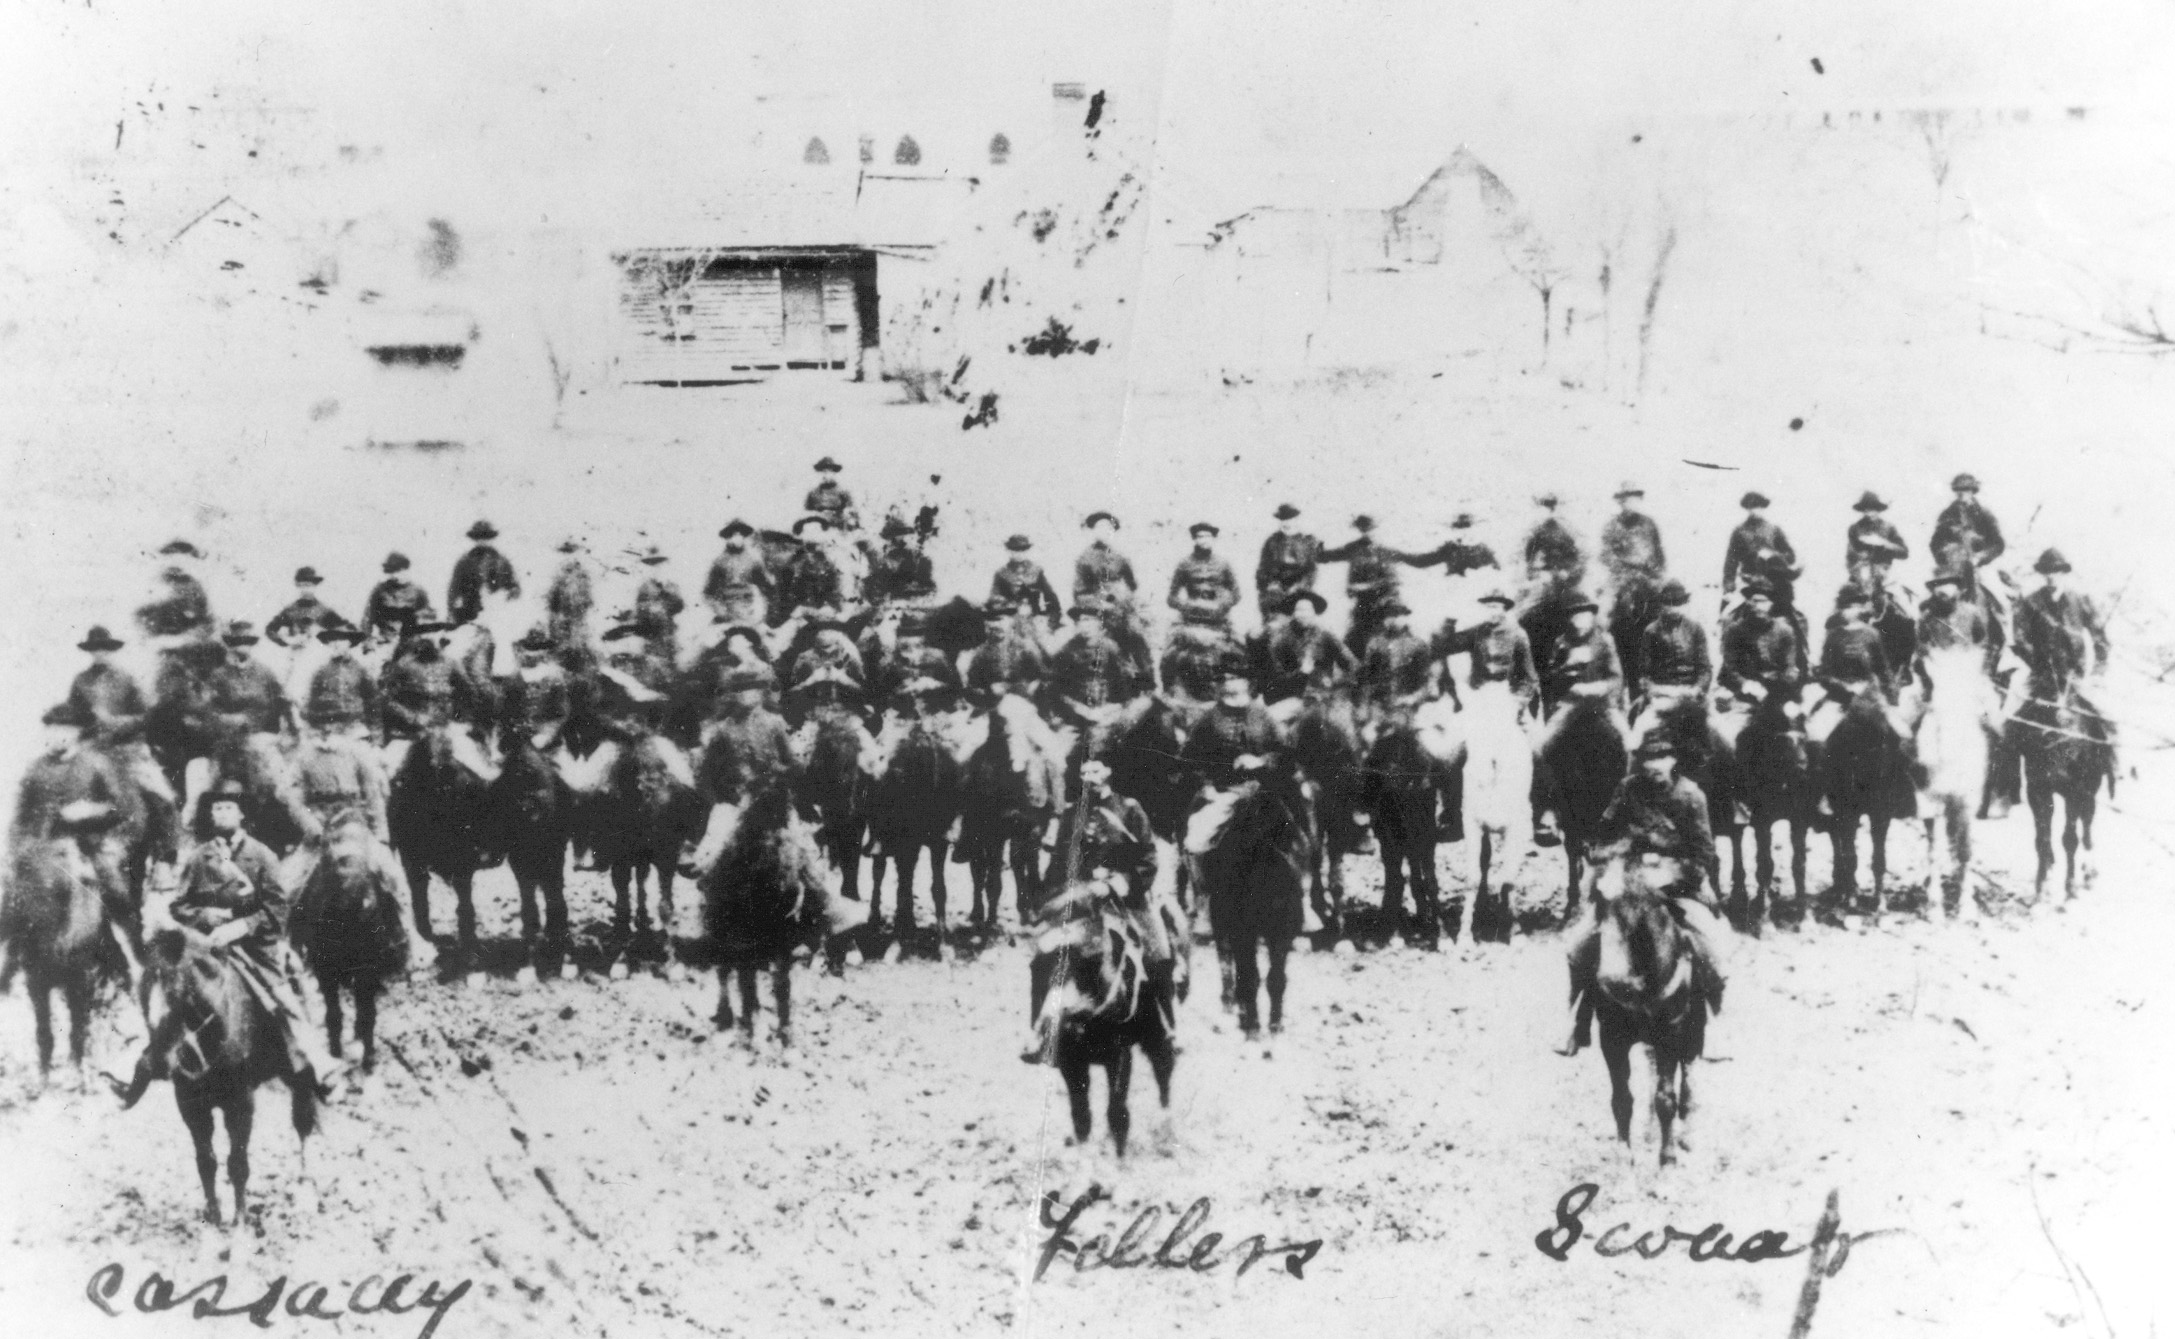 Federal cavalry on display. The Averell raid was a long penetration of Southern territory to break a rail supply line. 